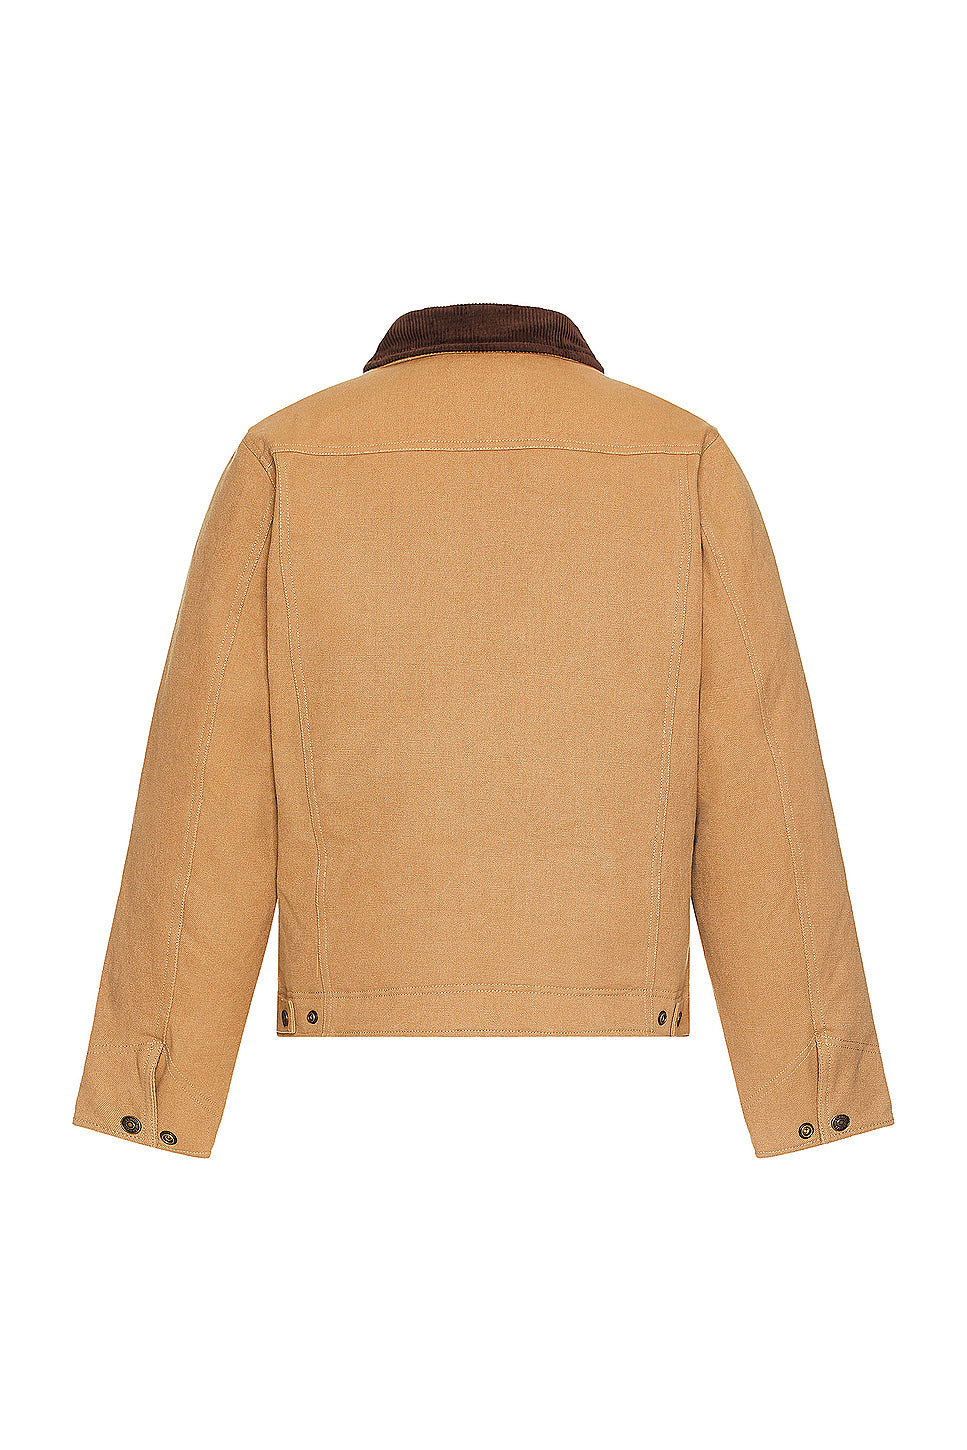 Union Canvas Down Filled Jacket